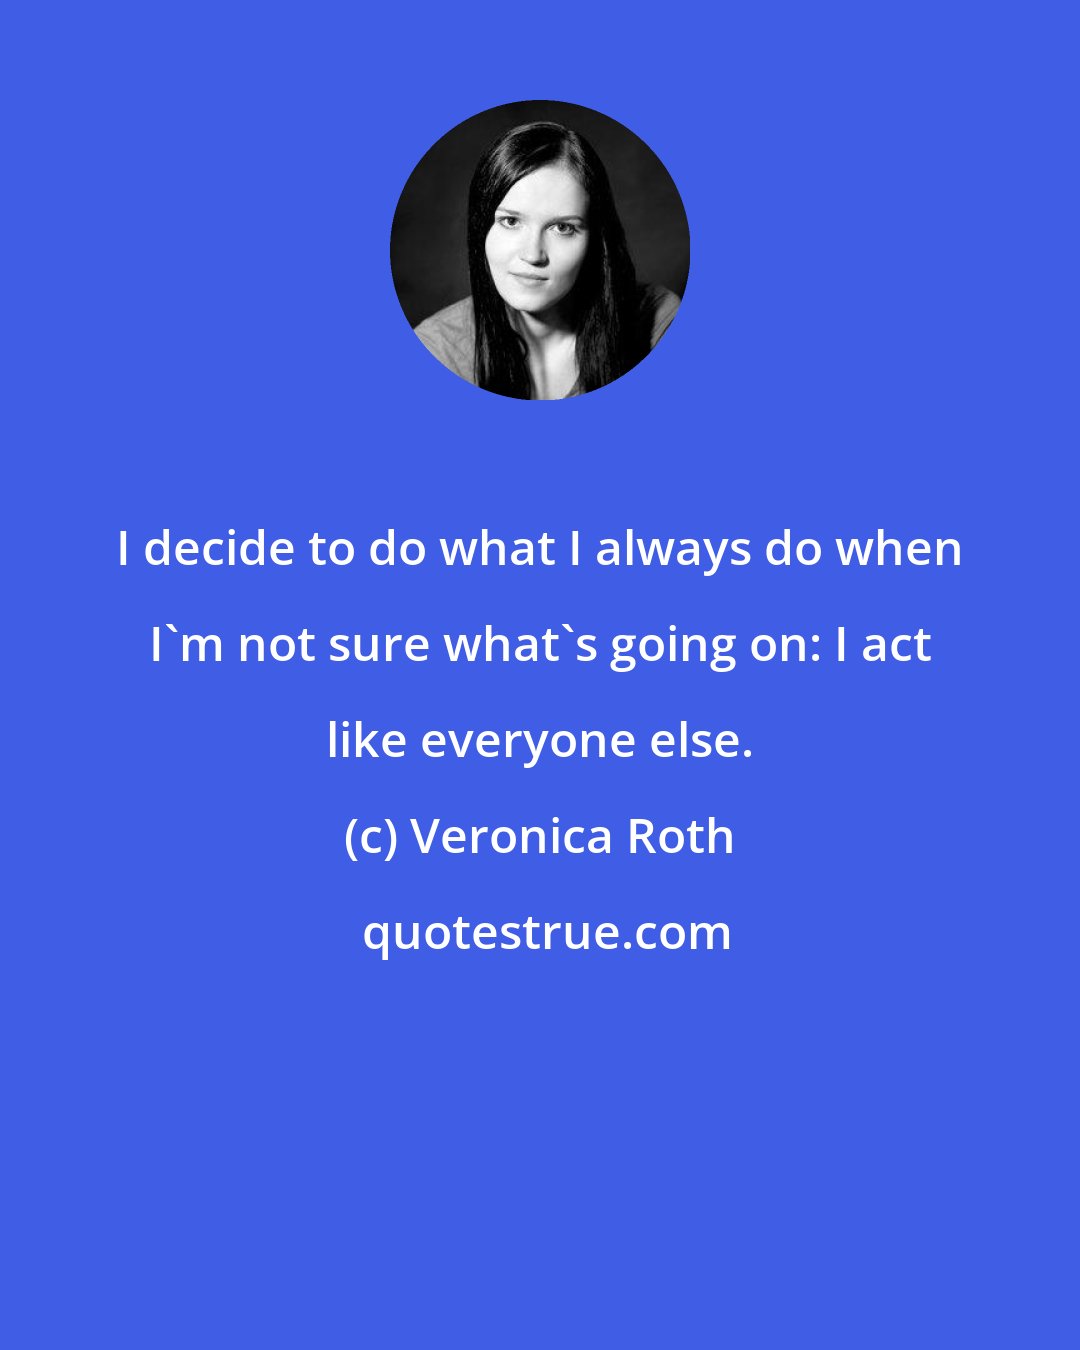 Veronica Roth: I decide to do what I always do when I'm not sure what's going on: I act like everyone else.